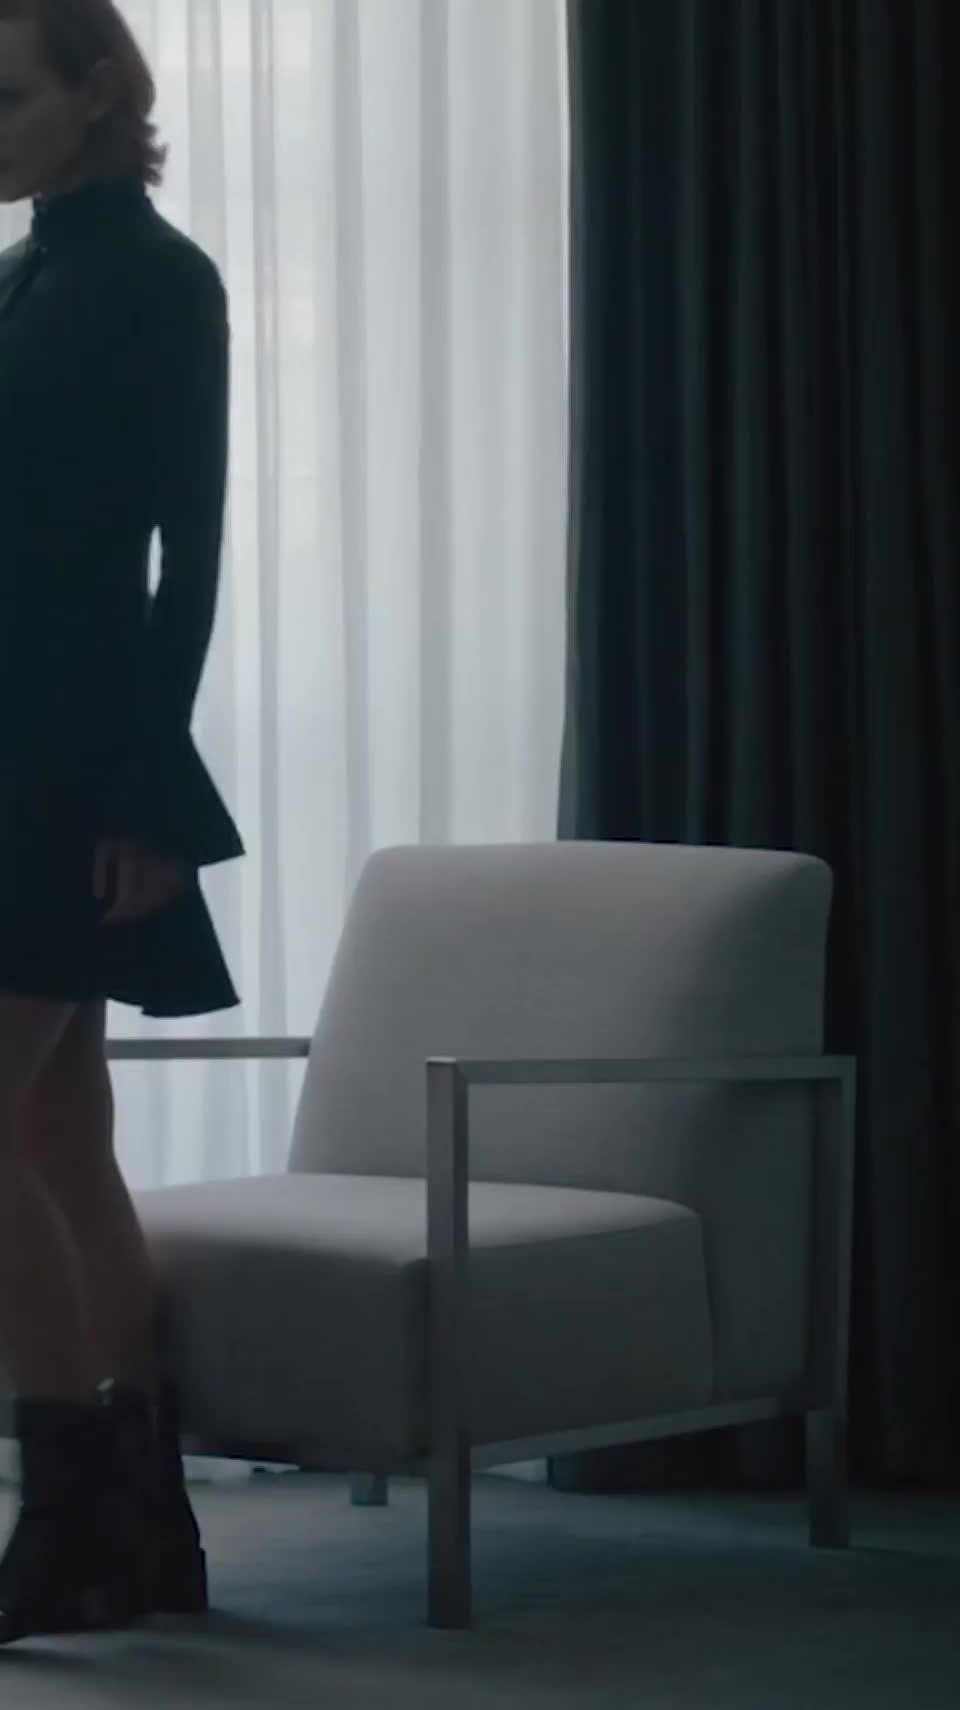 Louisa Krause - The Girlfriend Experience S2E1 (2017) : video clip